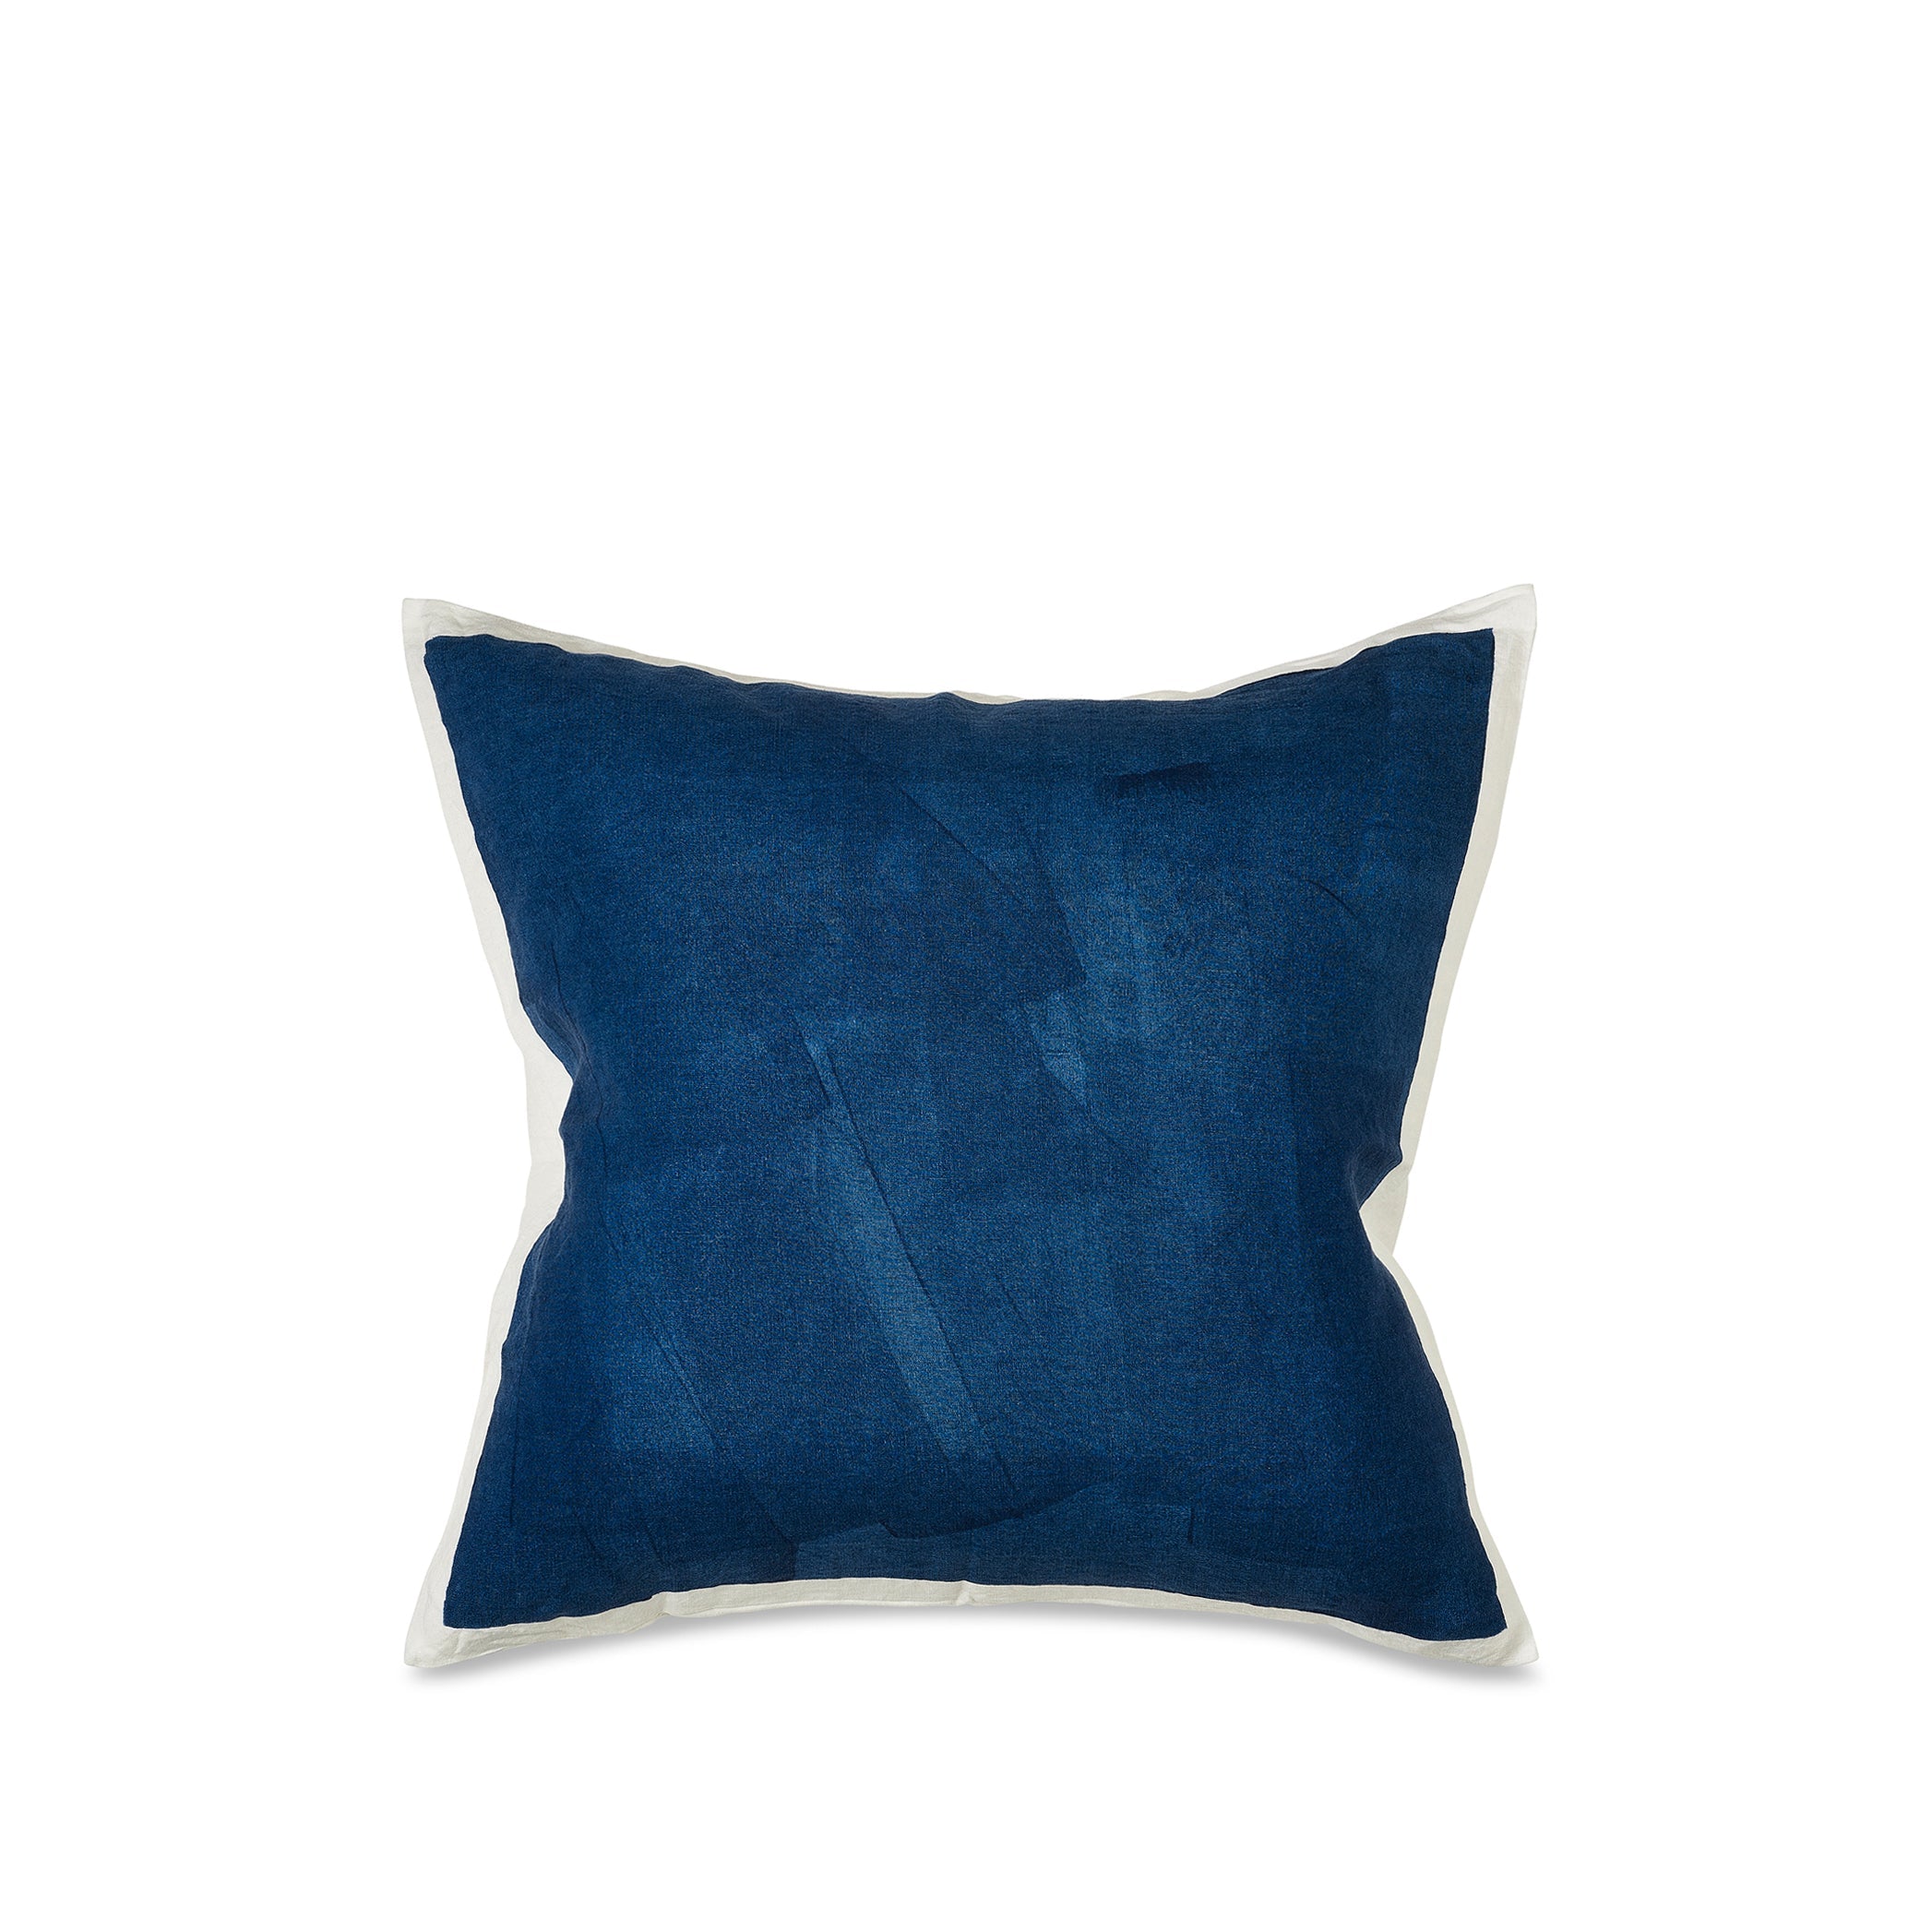 Hand Painted Linen Cushion in Midnight Blue, 60cm x 60cm